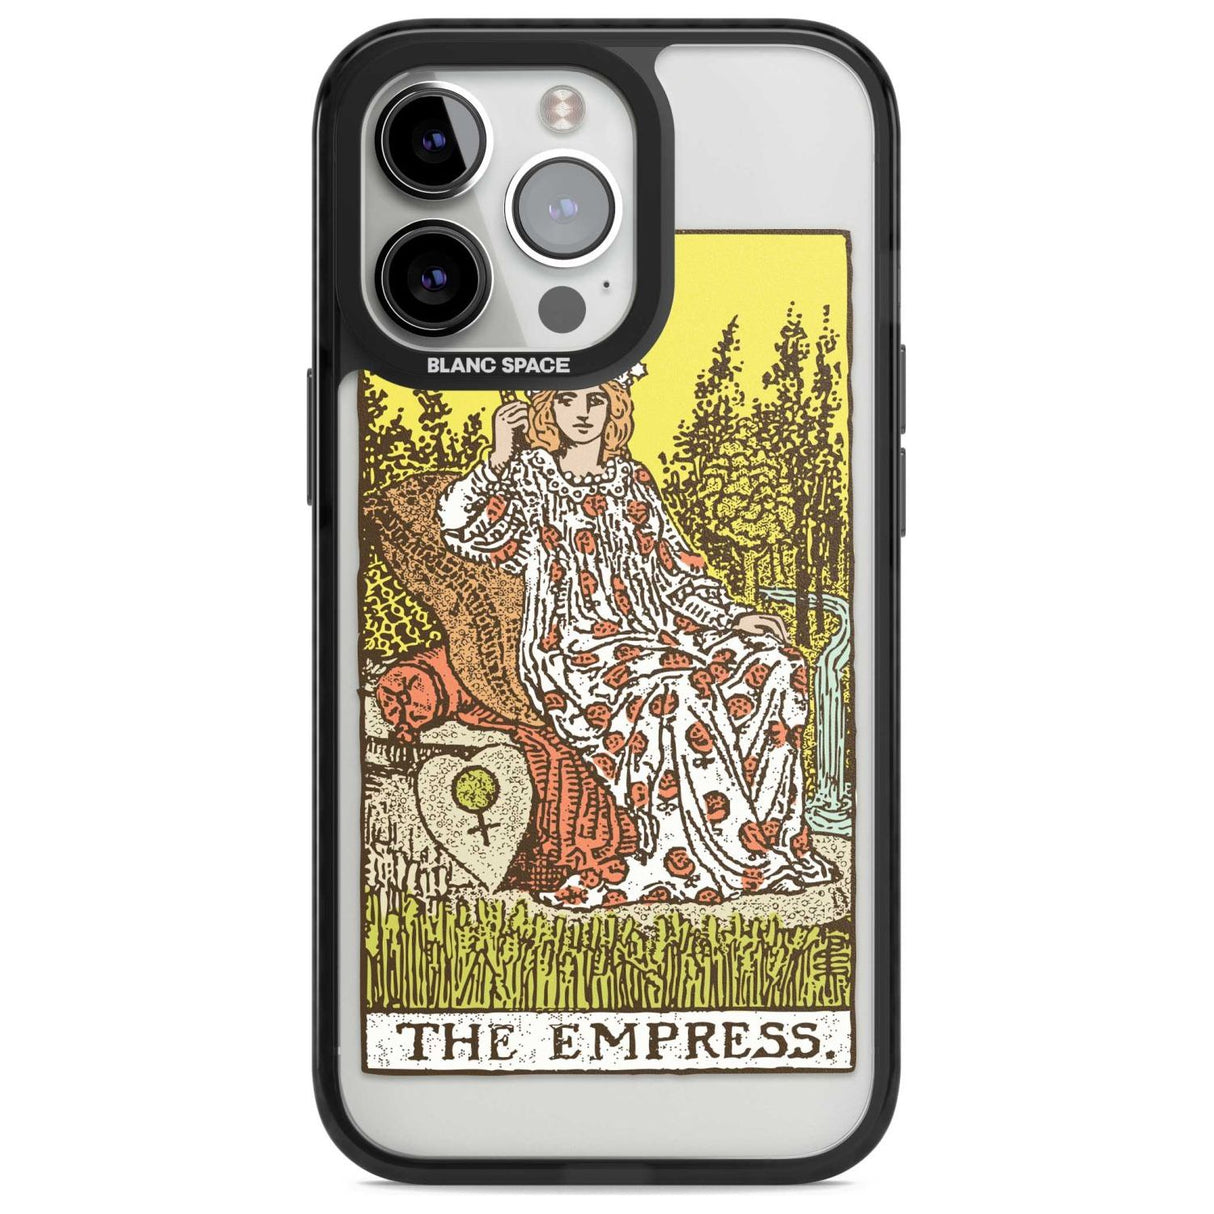 Personalised The Empress Tarot Card - Colour Custom Phone Case iPhone 15 Pro Max / Magsafe Black Impact Case,iPhone 15 Pro / Magsafe Black Impact Case,iPhone 14 Pro Max / Magsafe Black Impact Case,iPhone 14 Pro / Magsafe Black Impact Case,iPhone 13 Pro / Magsafe Black Impact Case Blanc Space